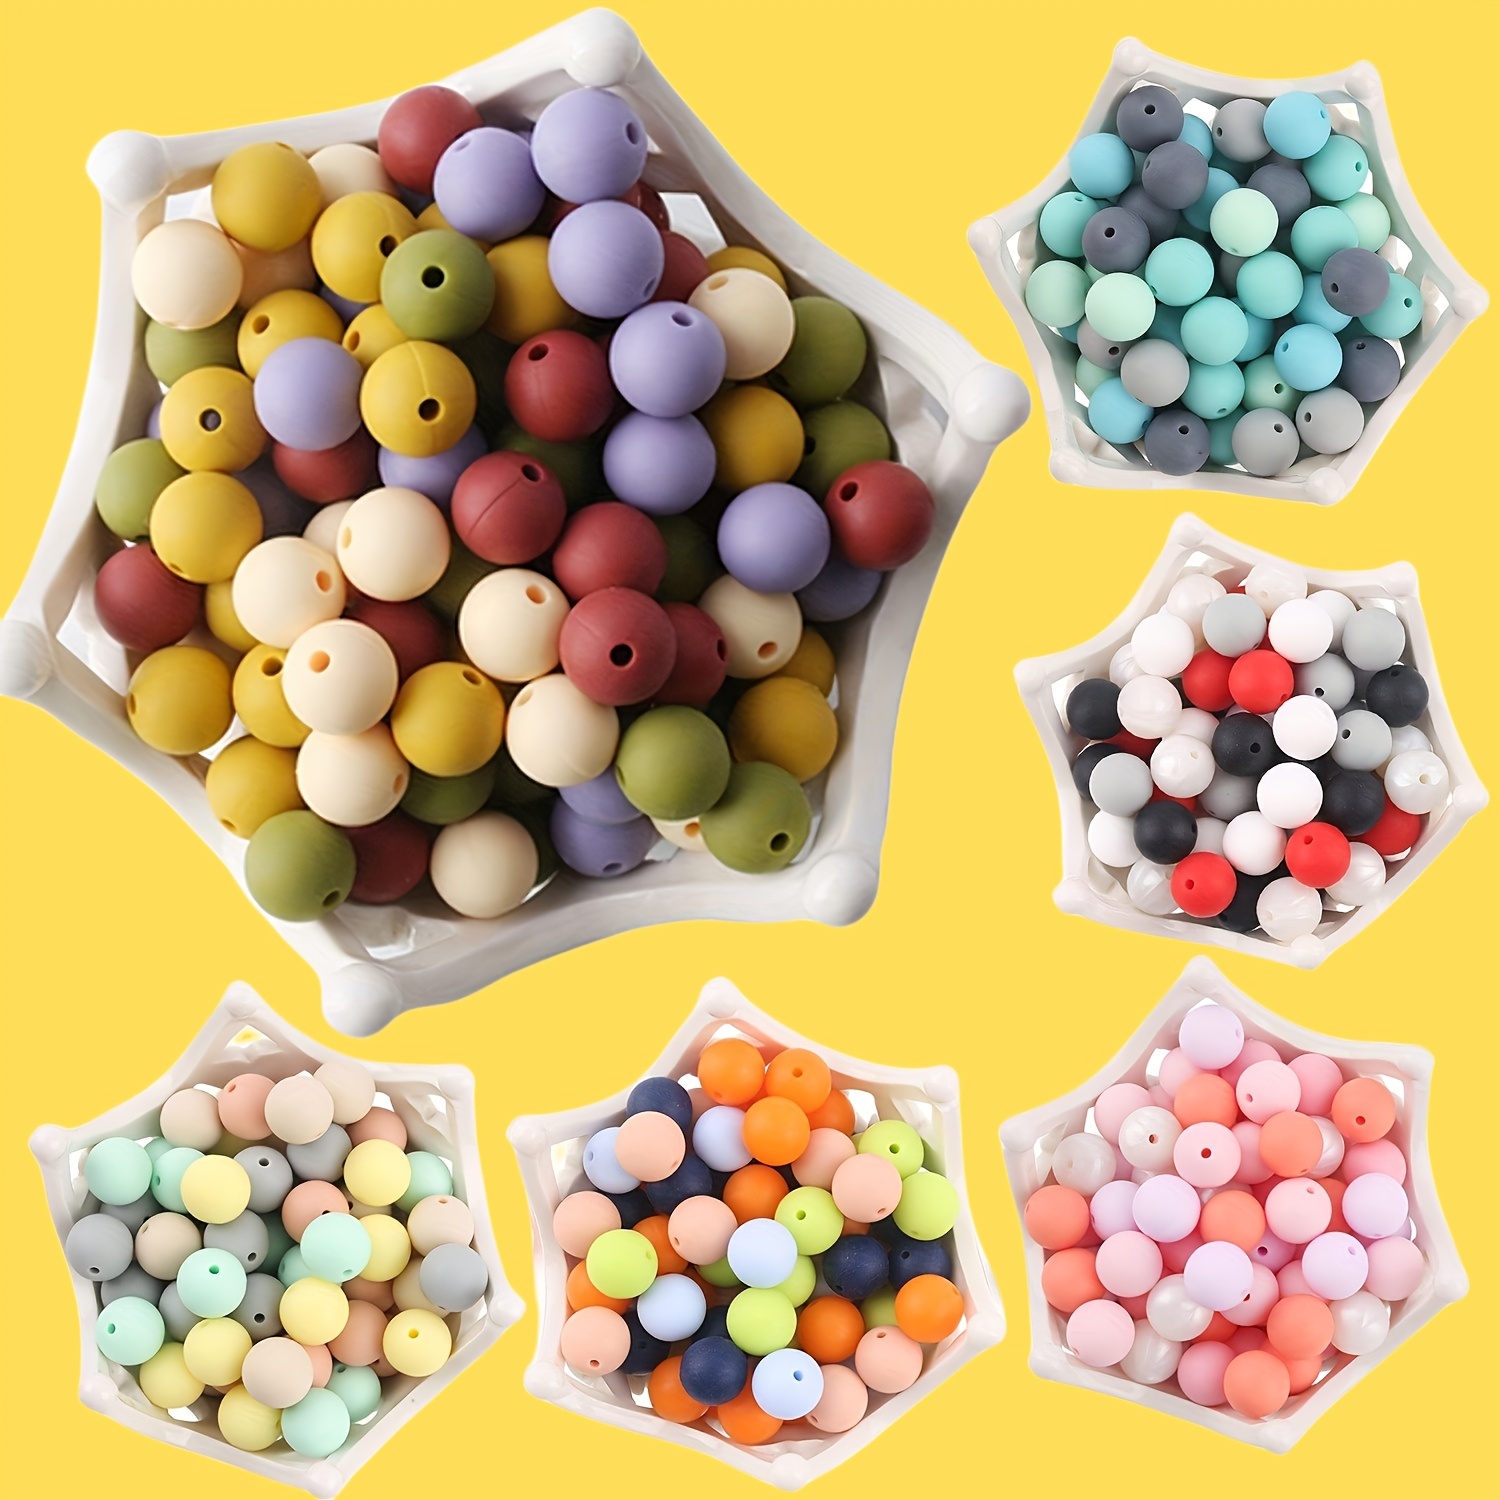 

50pcs/pack 12mm Colorful Mixed Round Silicone Solid Color Beads Fashion For Earrings Bracelet Necklace Bag Chain Keychain Jewelry Diy Handmade Craft Supplies